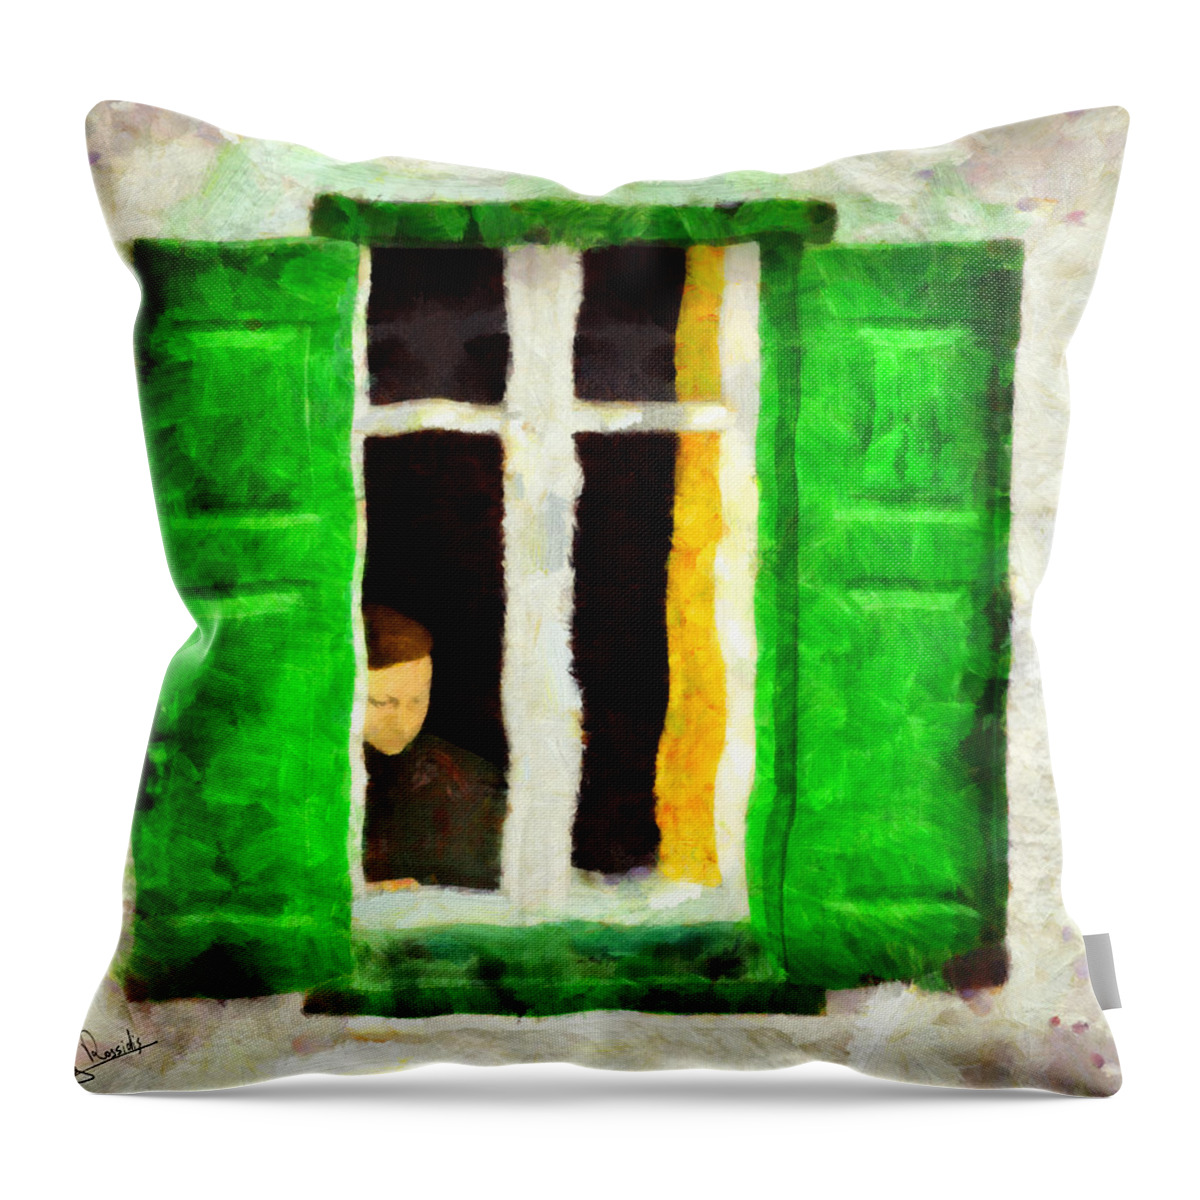 Solitude Throw Pillow featuring the painting Solitude by George Rossidis